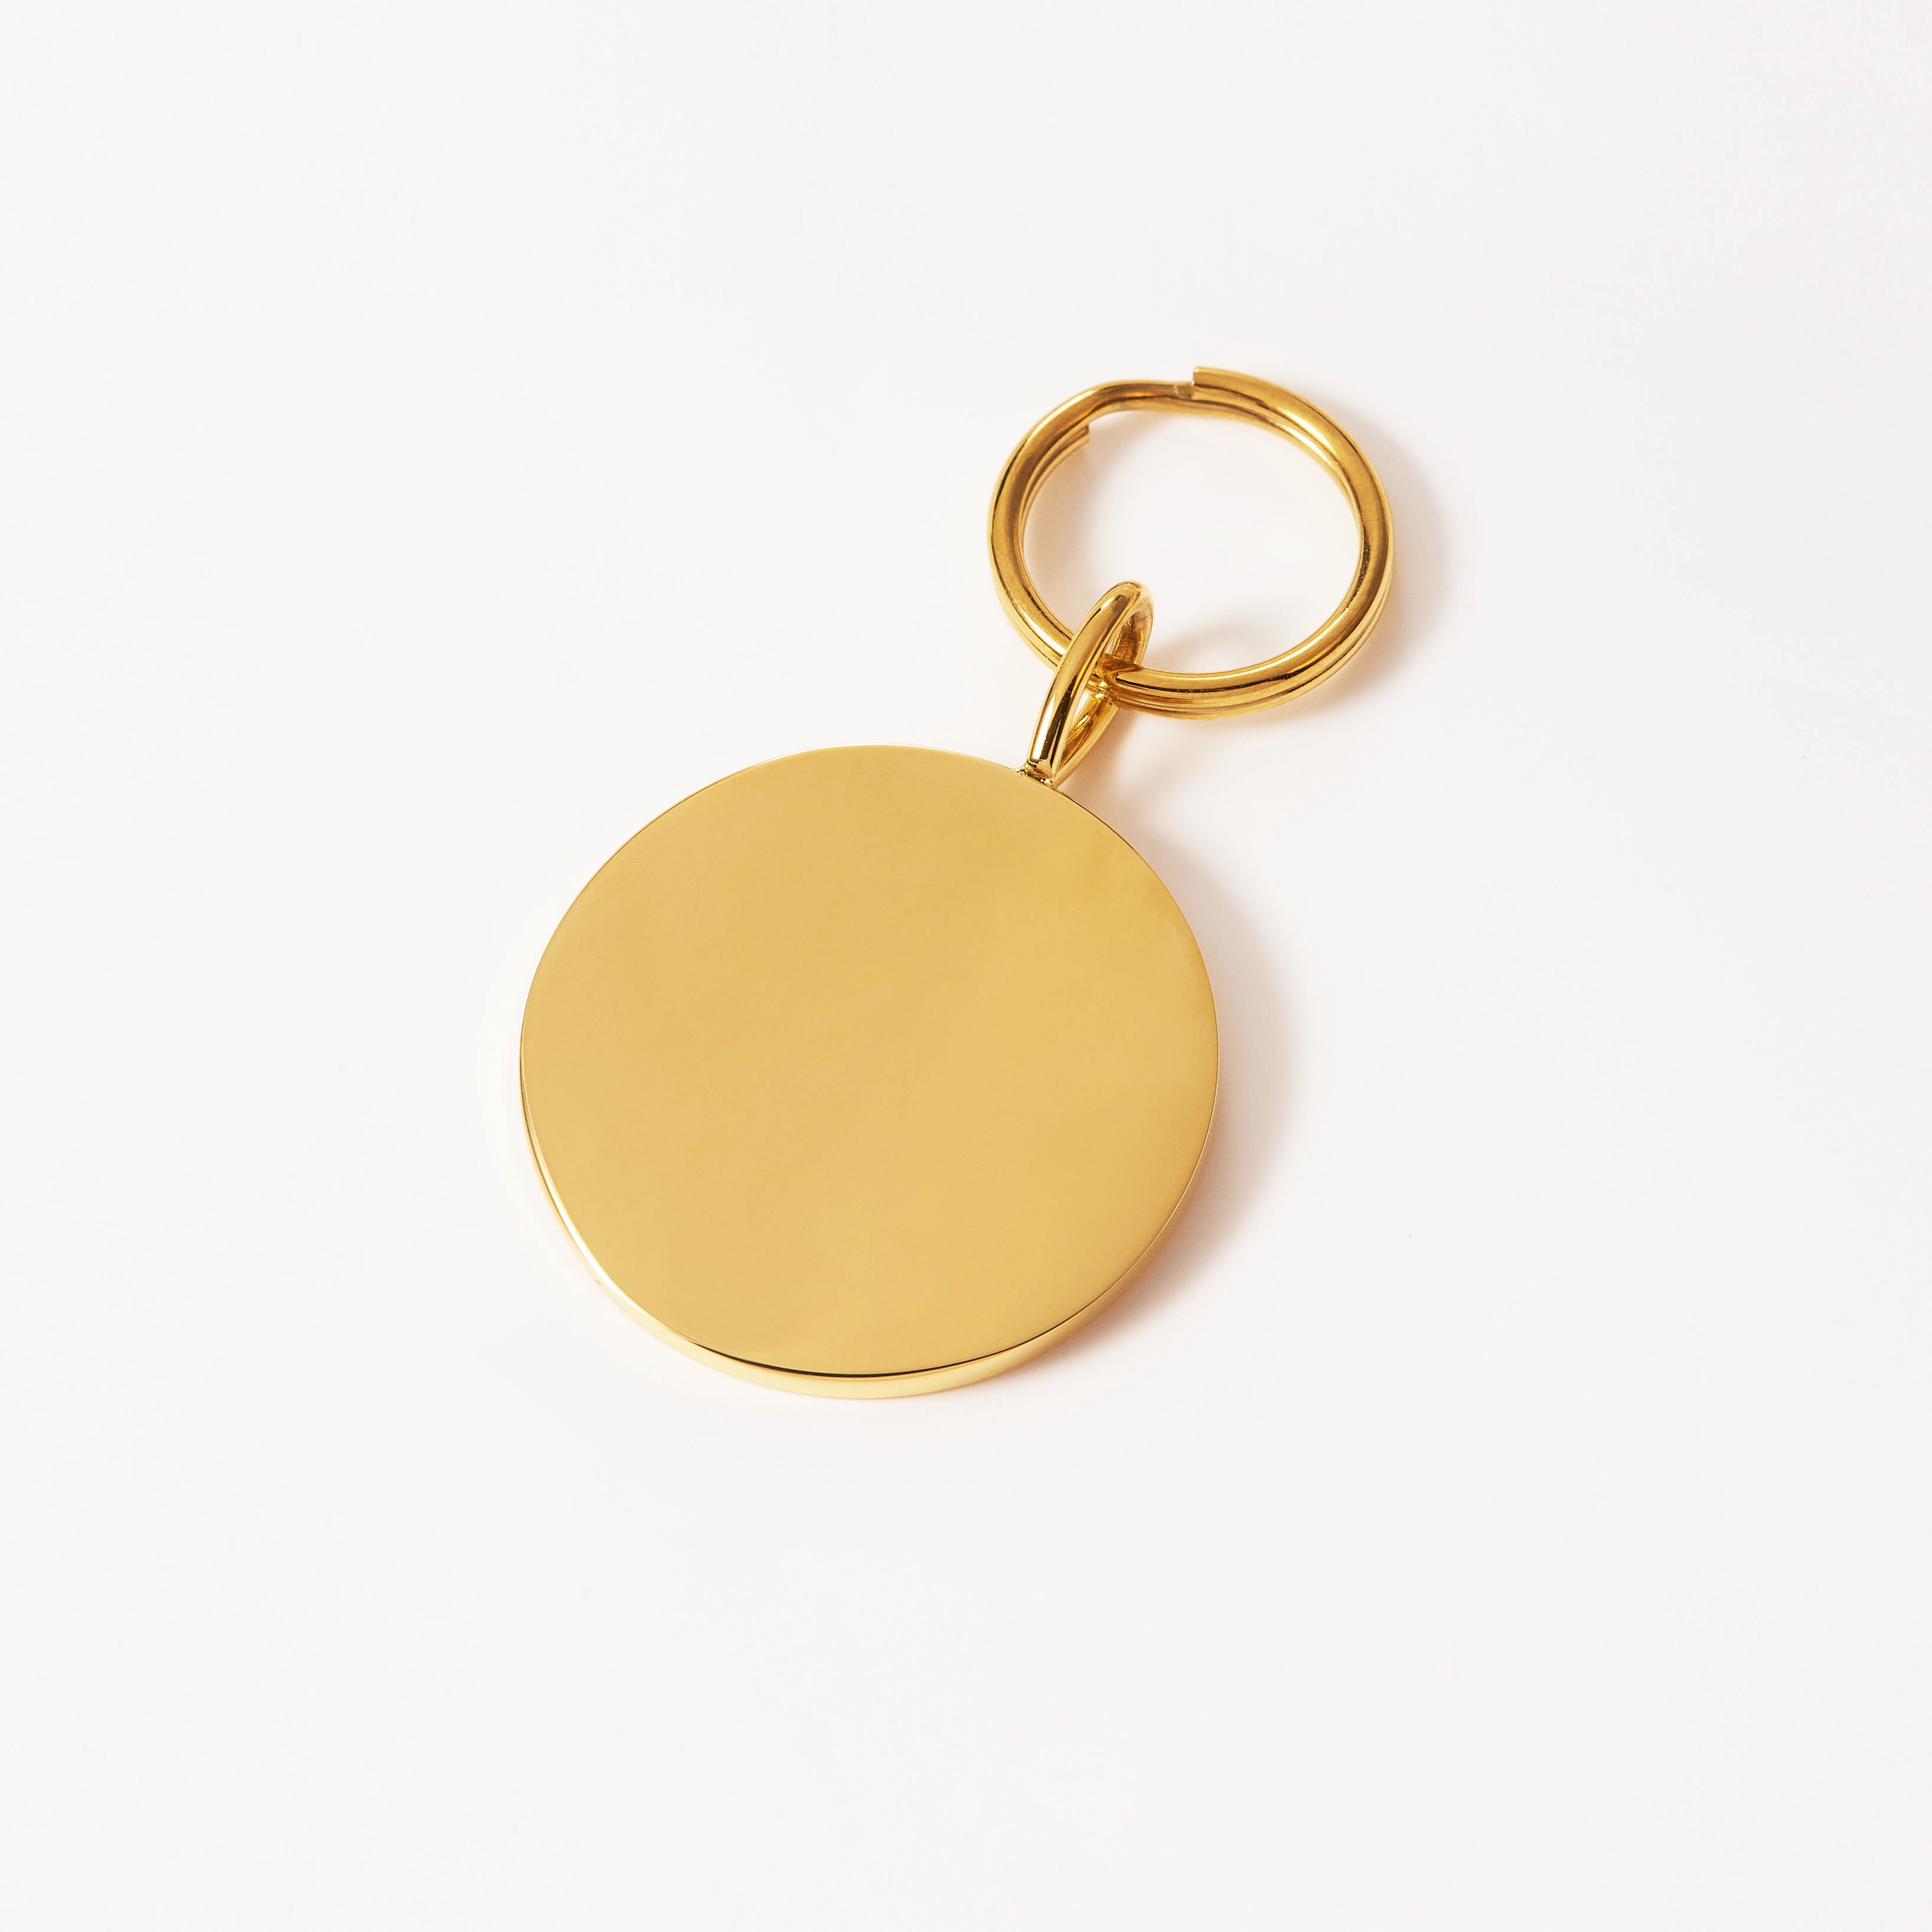 you found me. x 18k Yellow gold plated, or Stainless steel Dog tag